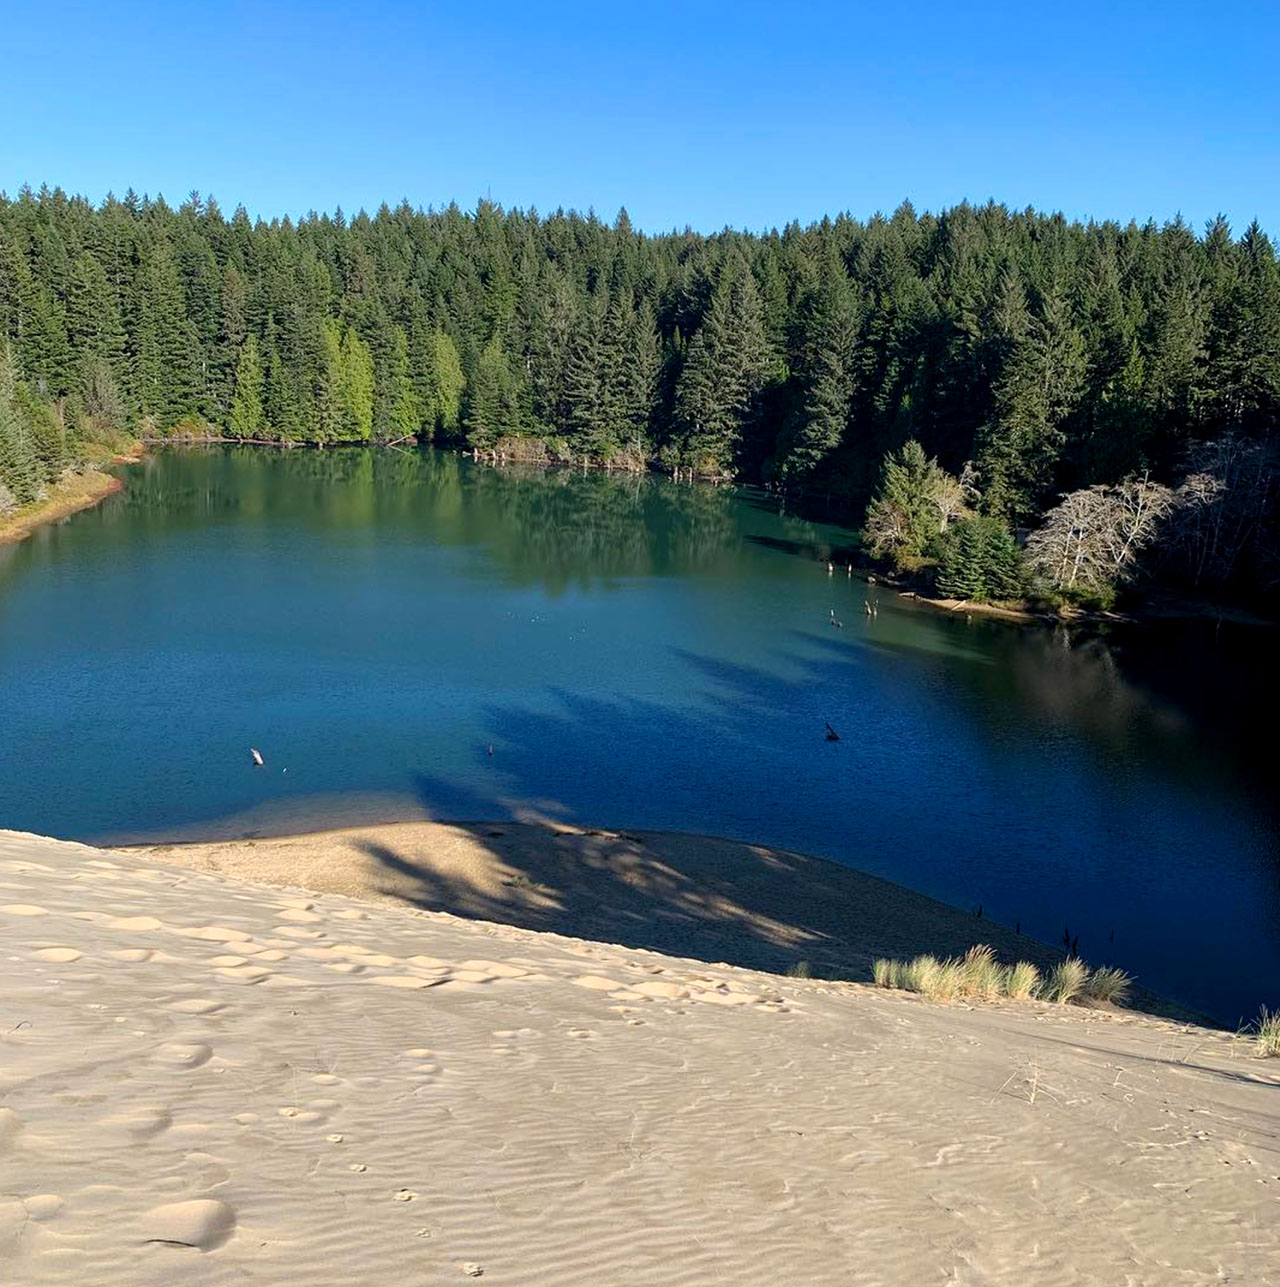 View from the top of the dune at Hall Lake in Lakeside, Oregon